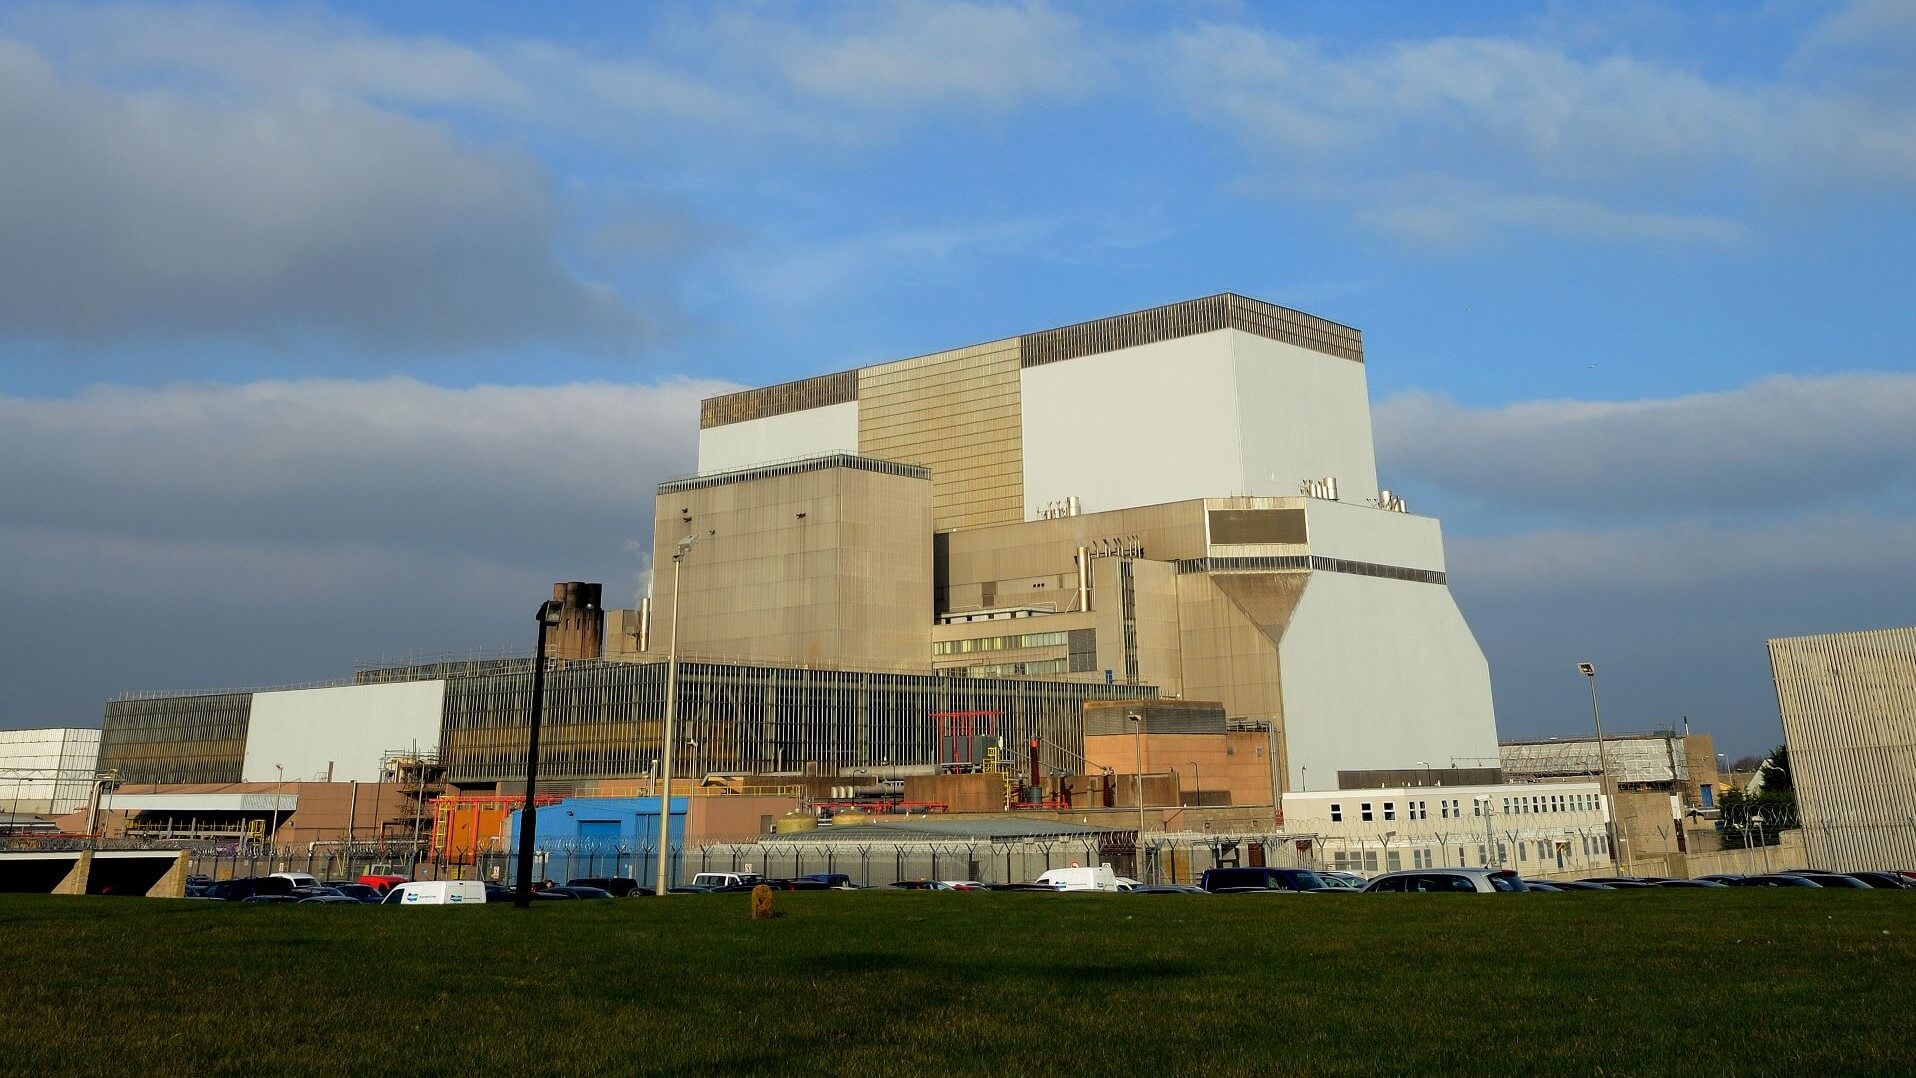 Exterior photo of Hinkley Point B nuclear power station